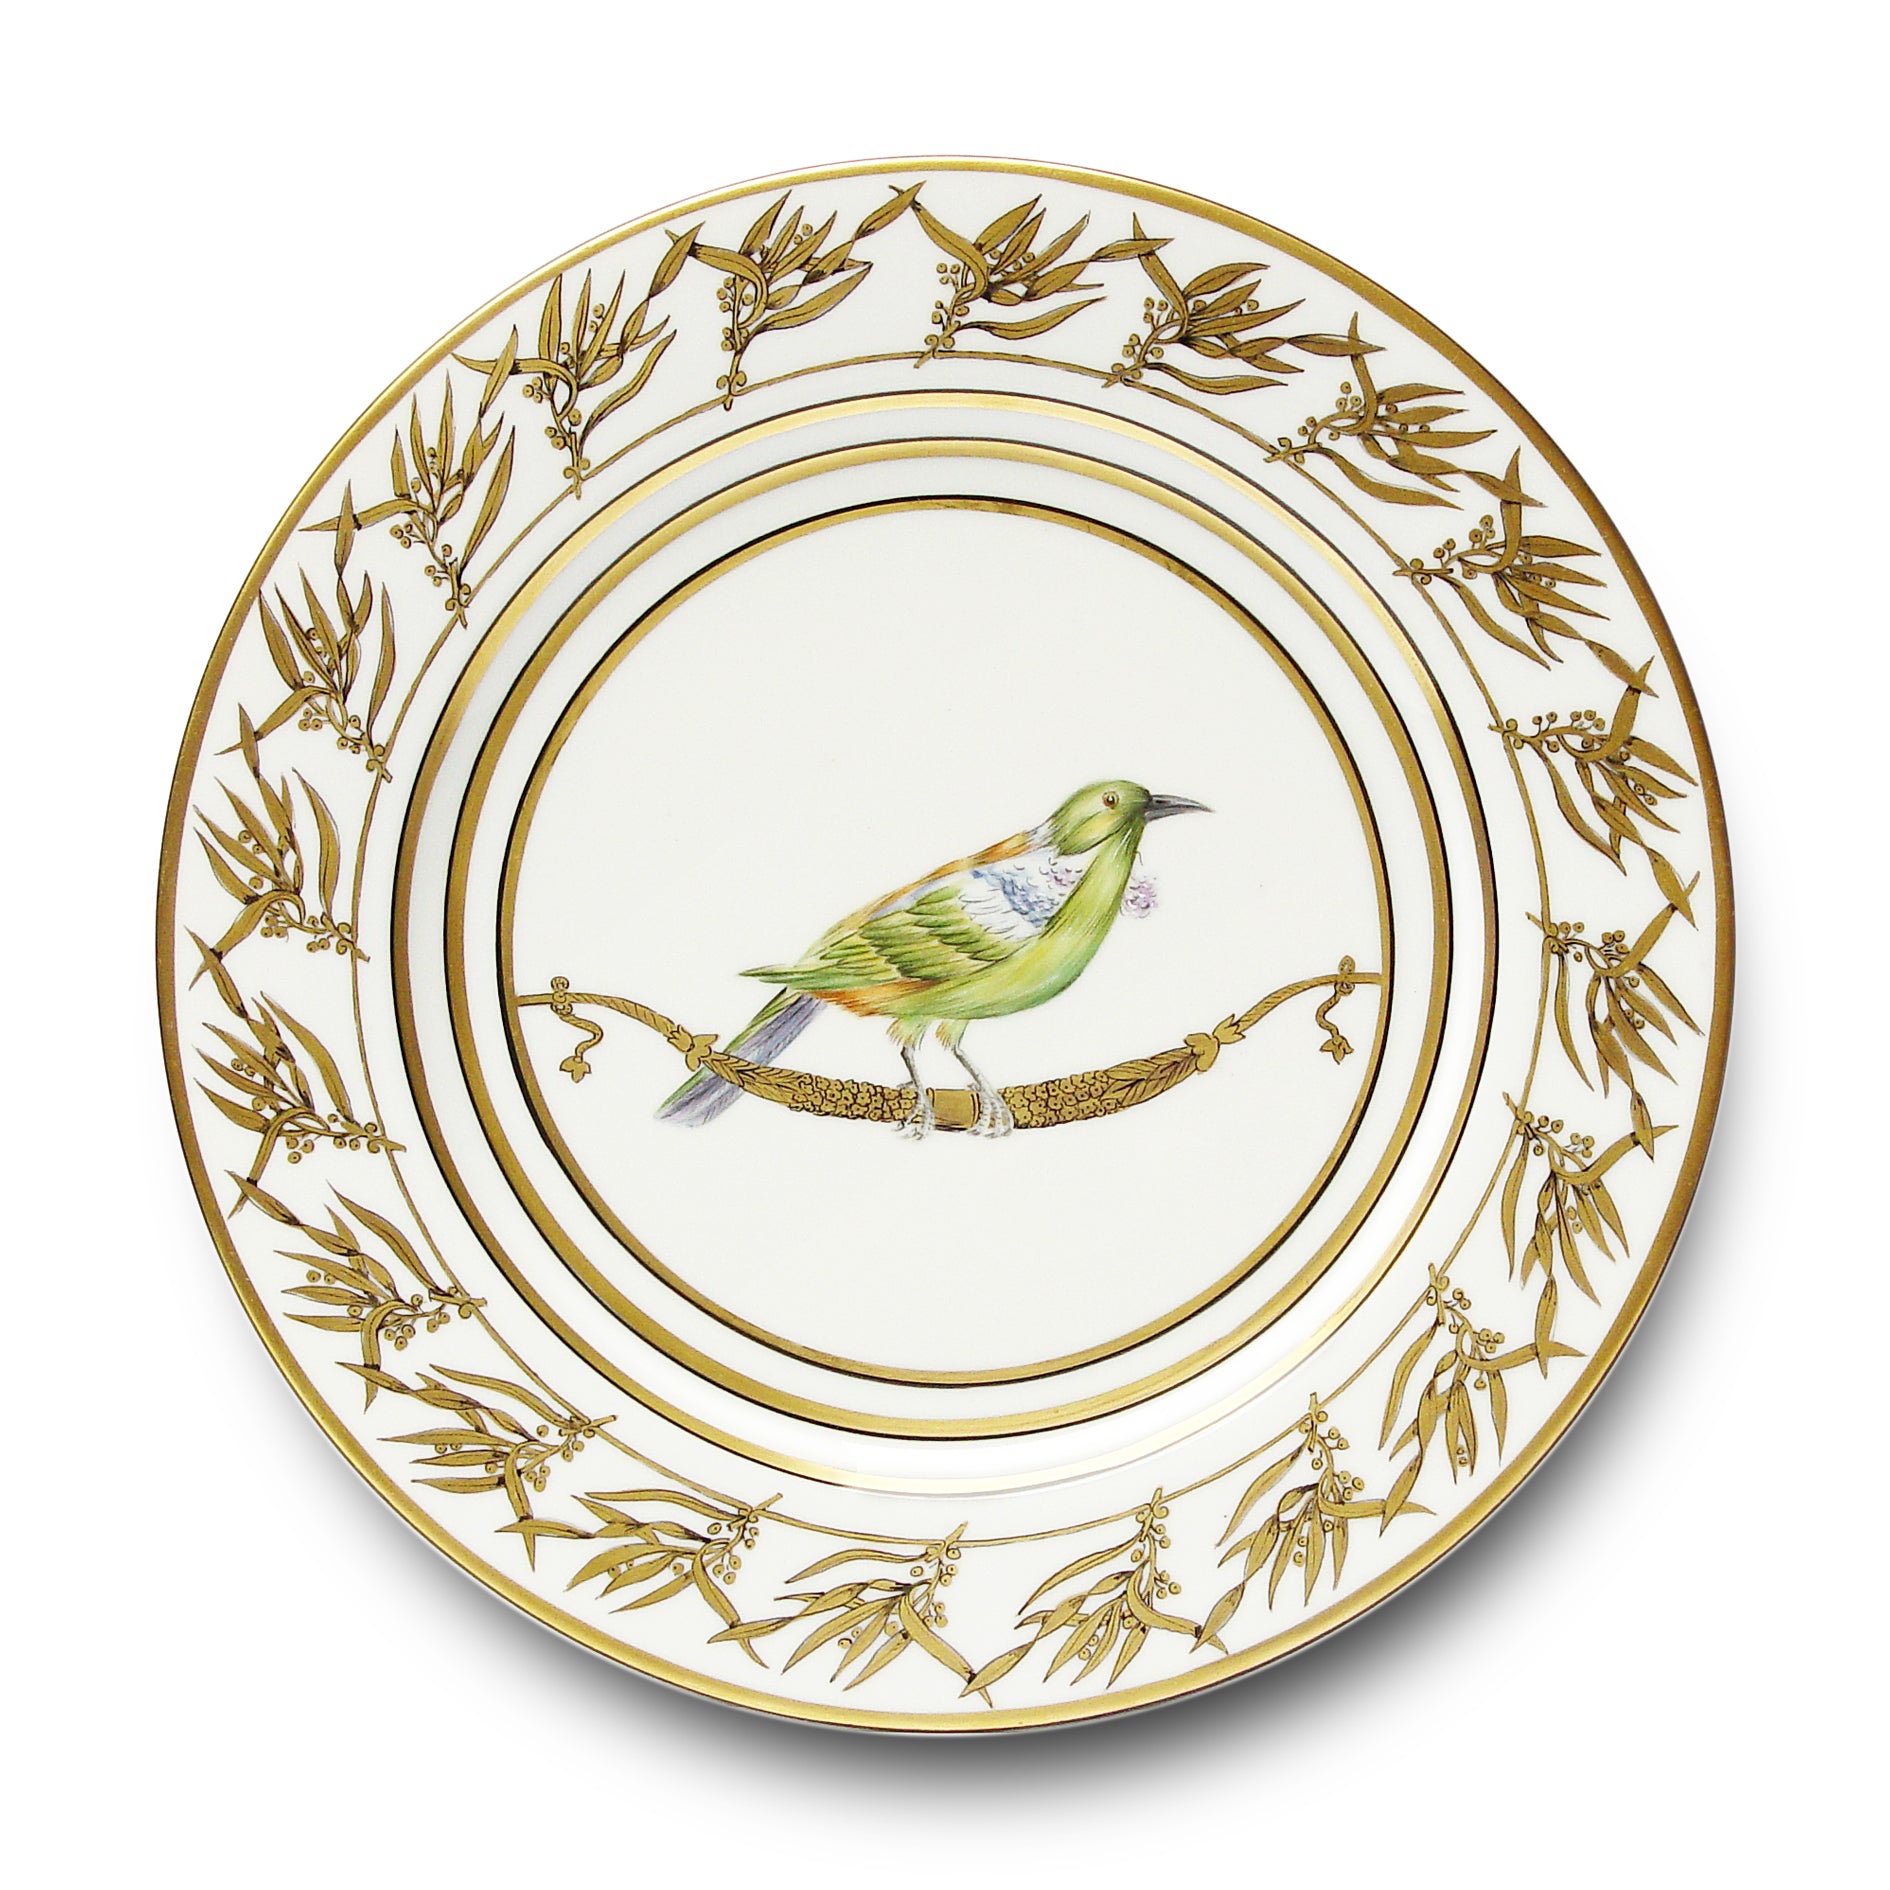 Or des Airs - Buffet plate 04
